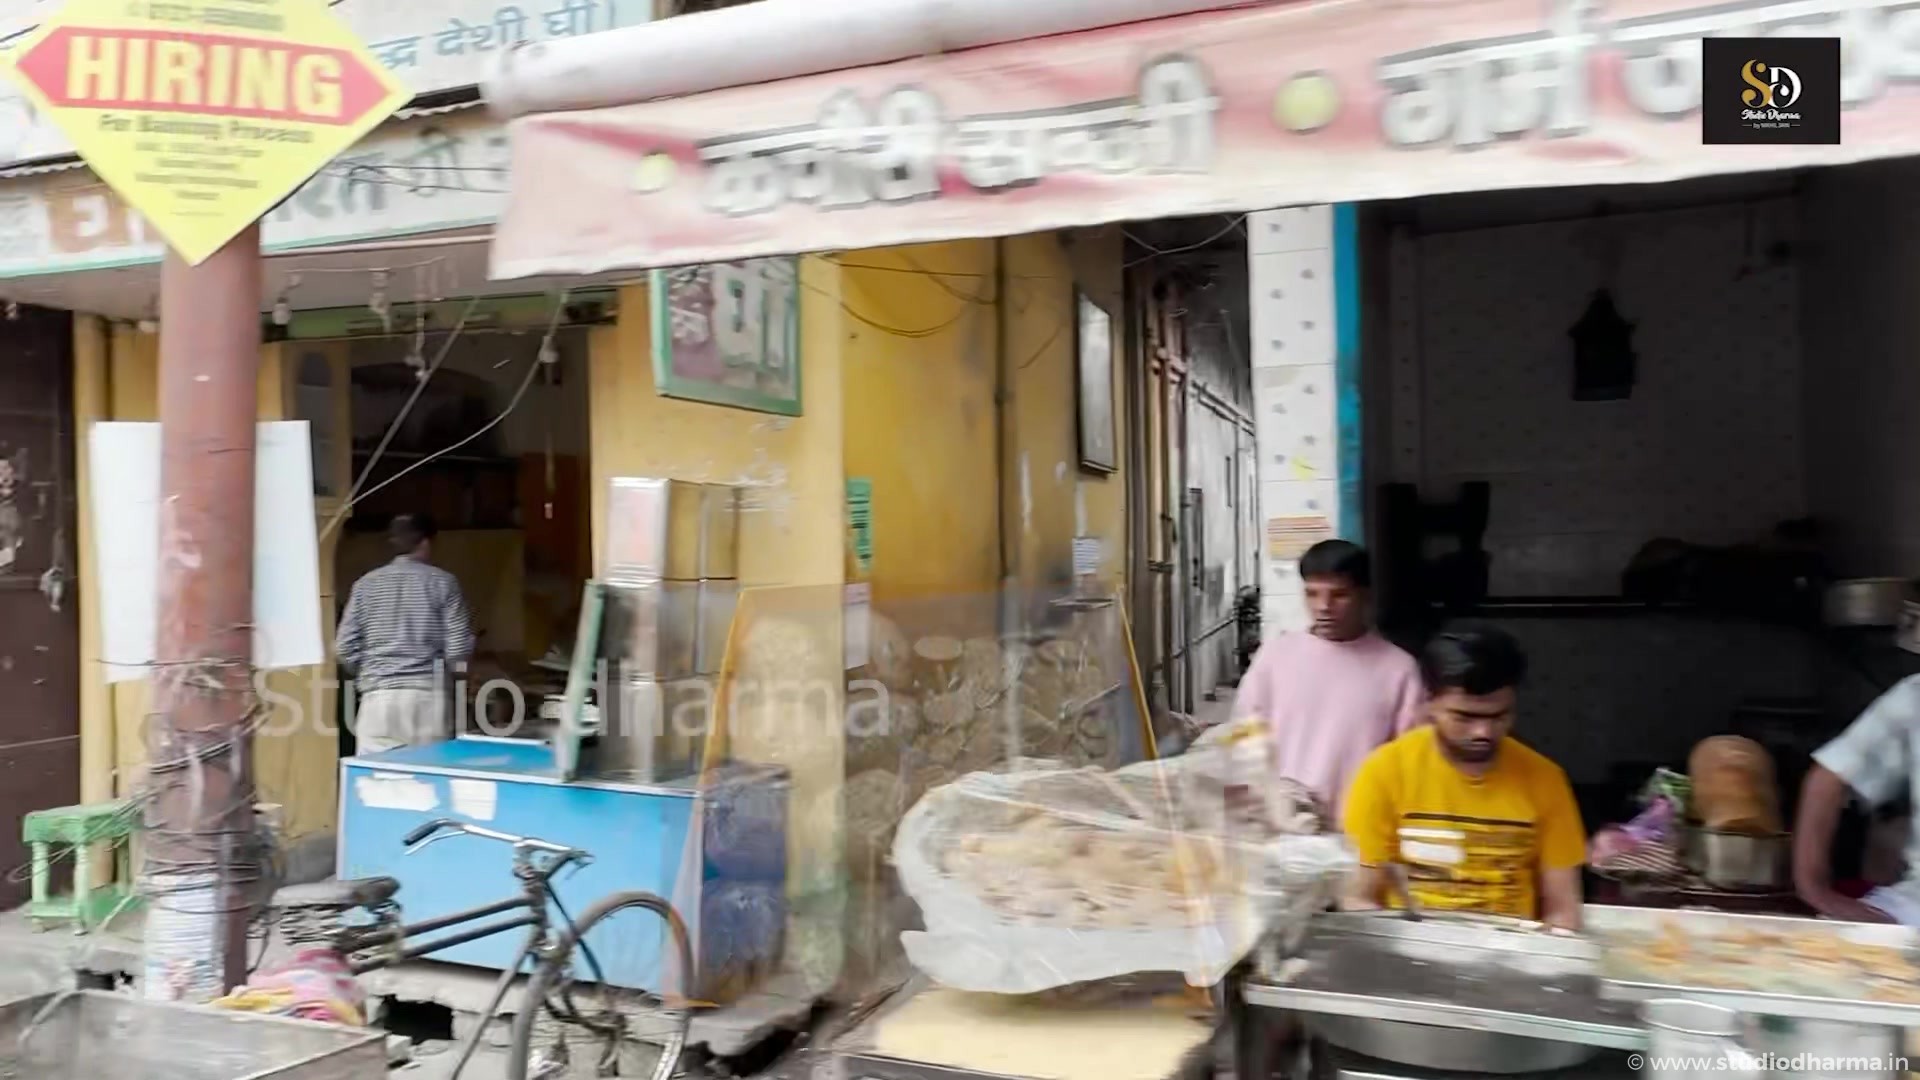 StudioDharma is glad to introduce this insightful video dedicated to all the admirers of our very own city Meerut.